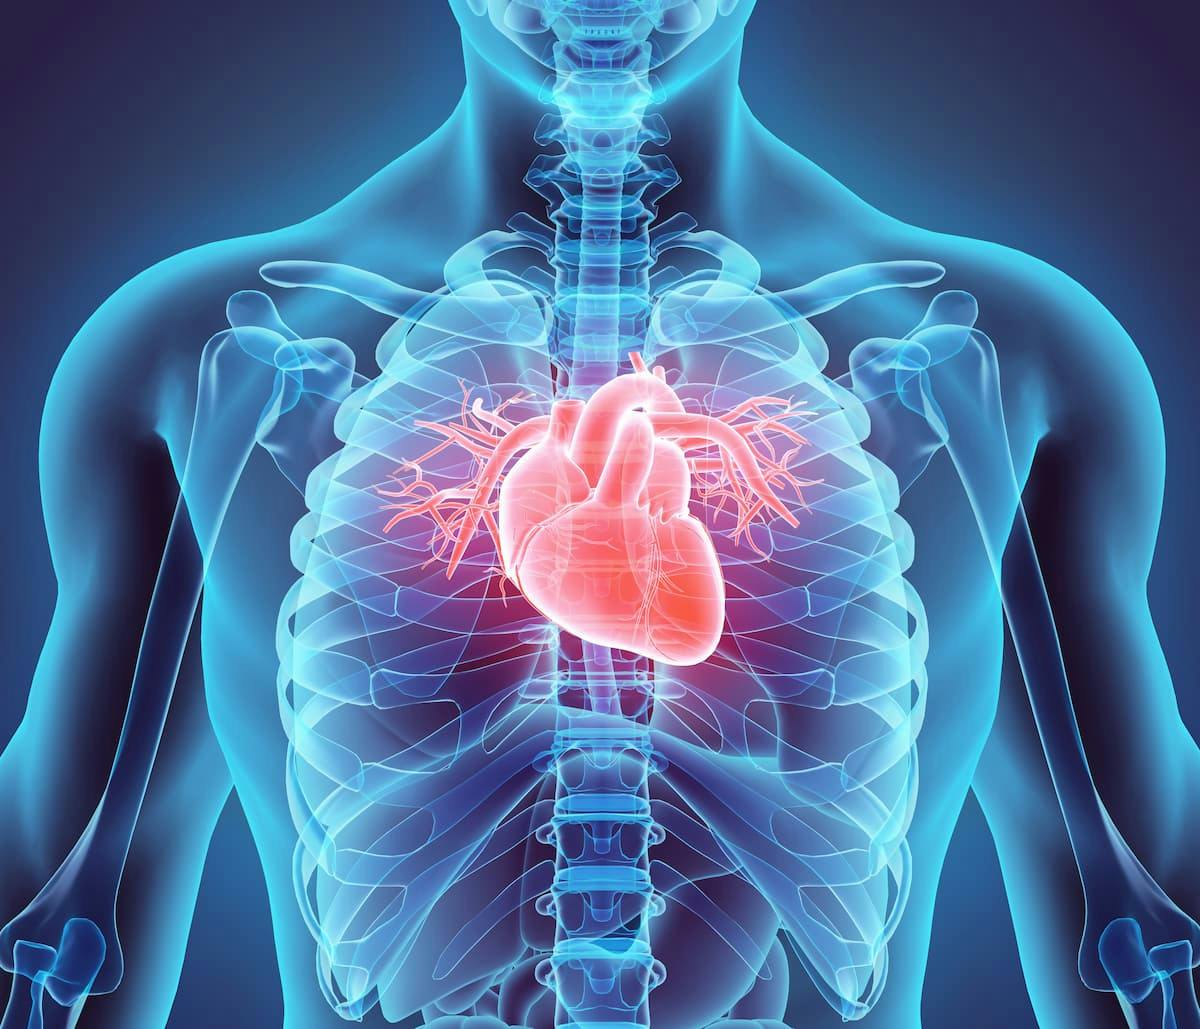 BioCardia Likely to Miss the Mark in Phase 3 CardiAMP Heart Failure Cell Therapy Trial